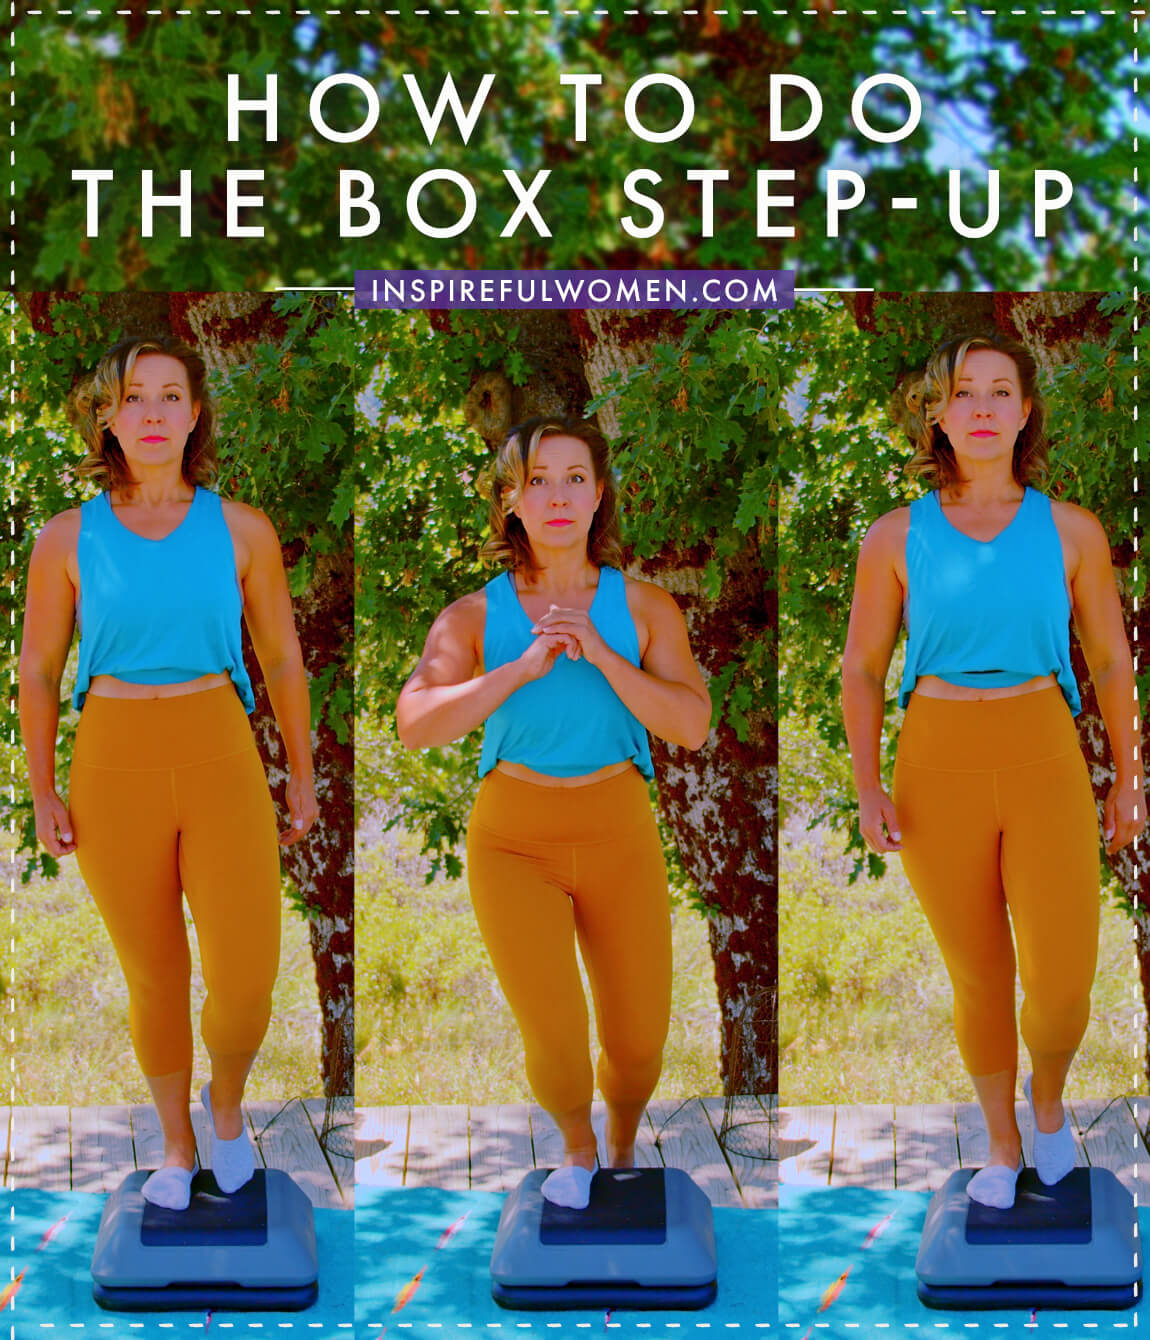 how-to-box-step-ups-forward-stepup-quads-glutes-lower-body-exercise-at-home-proper-form